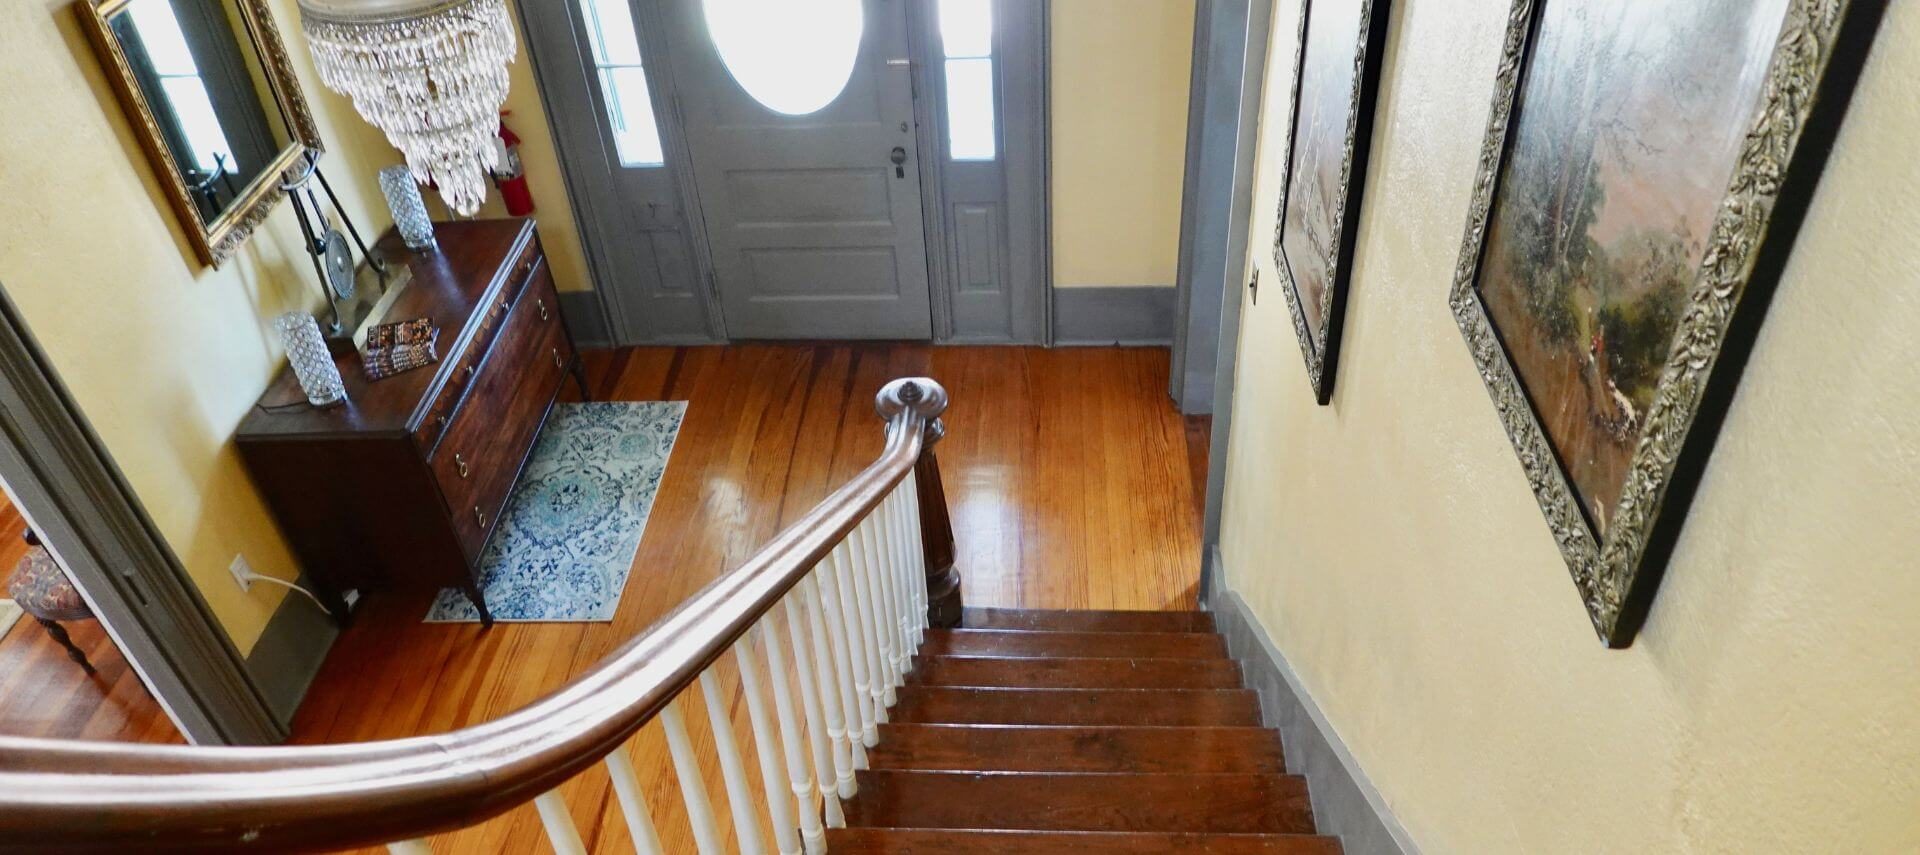 entryway with wood stars, white spindles and wood handrail, with wood floors, a grey door with an oval window and vertical side windows, cream-colored walls with grey trim